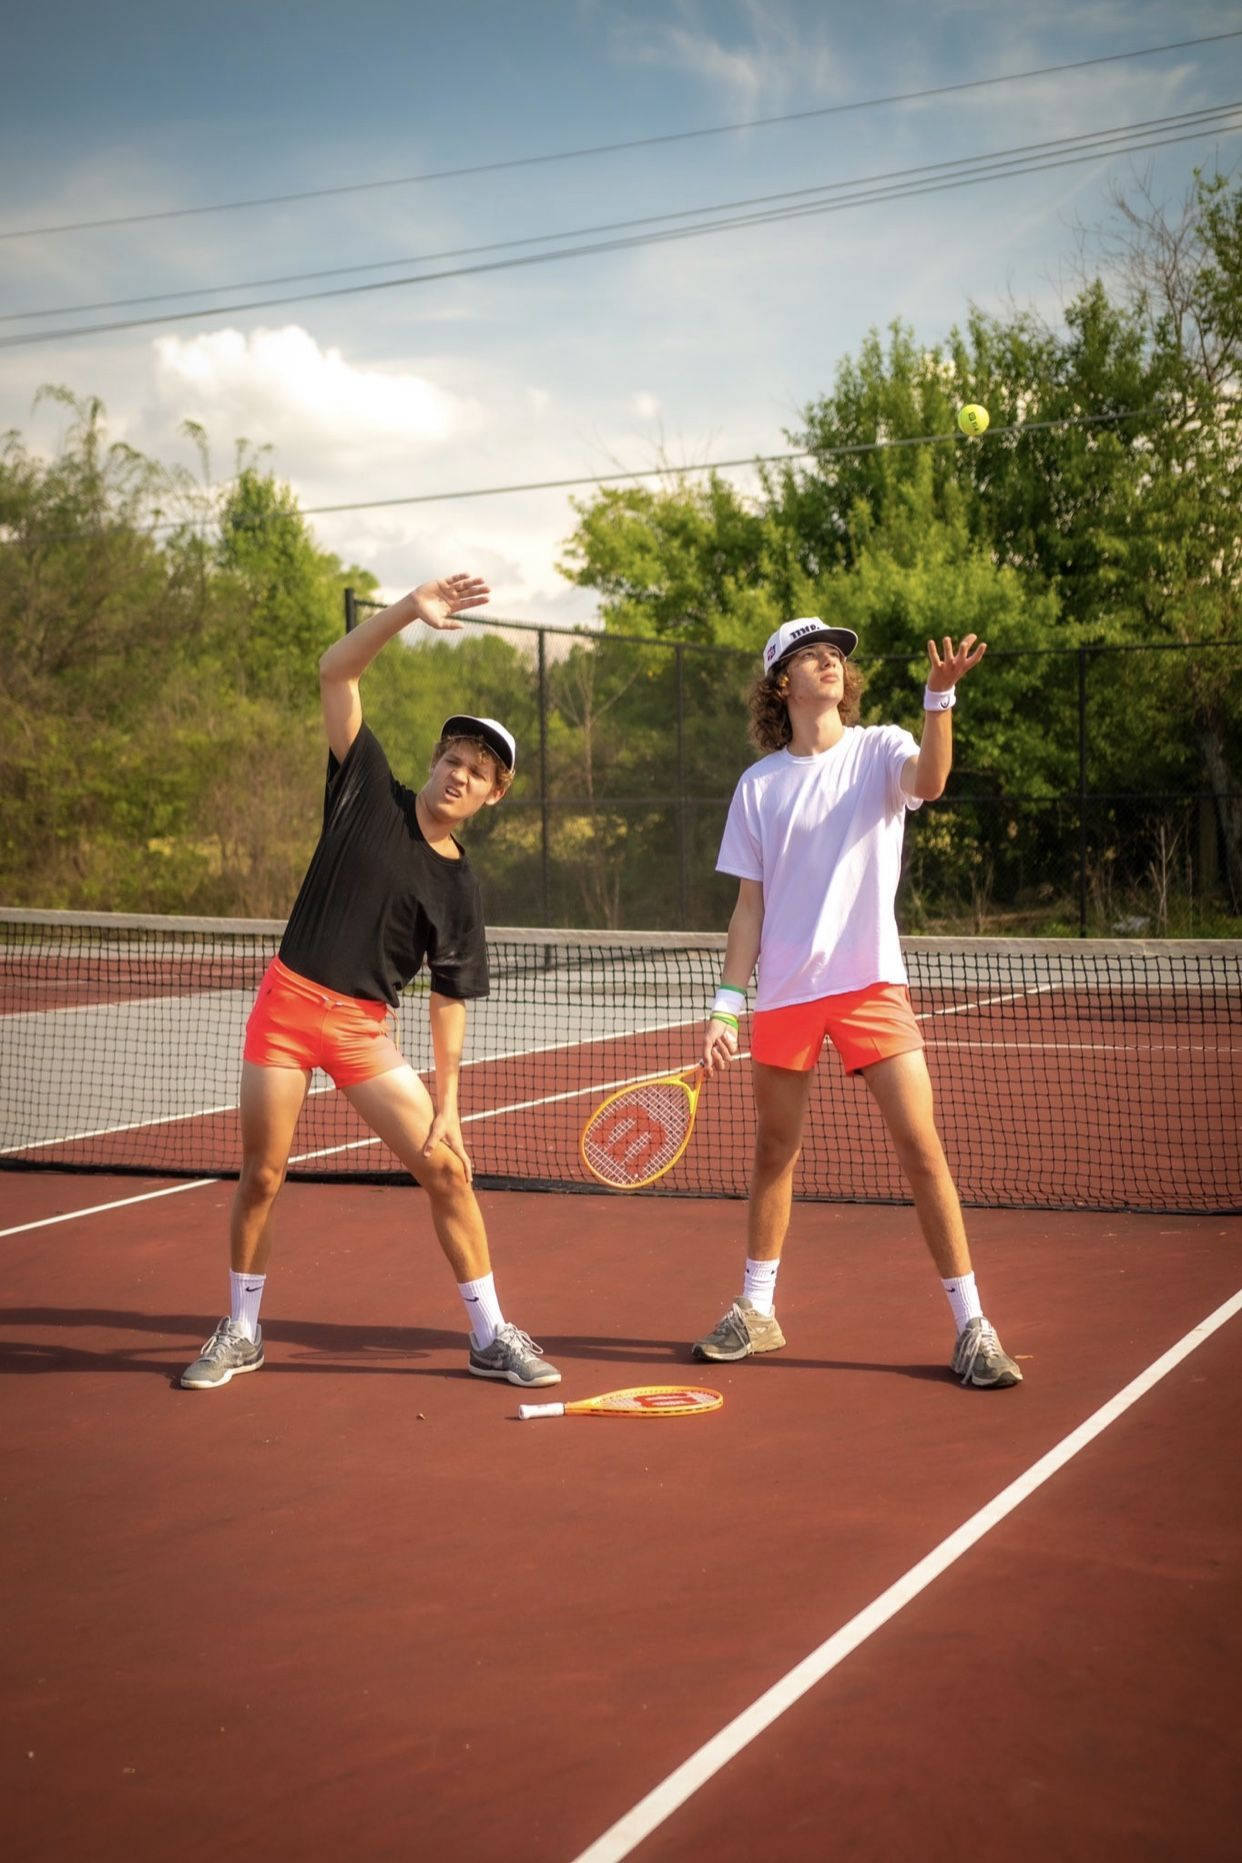 Baylen Levine And Kyle Tennis Outfit Wallpaper